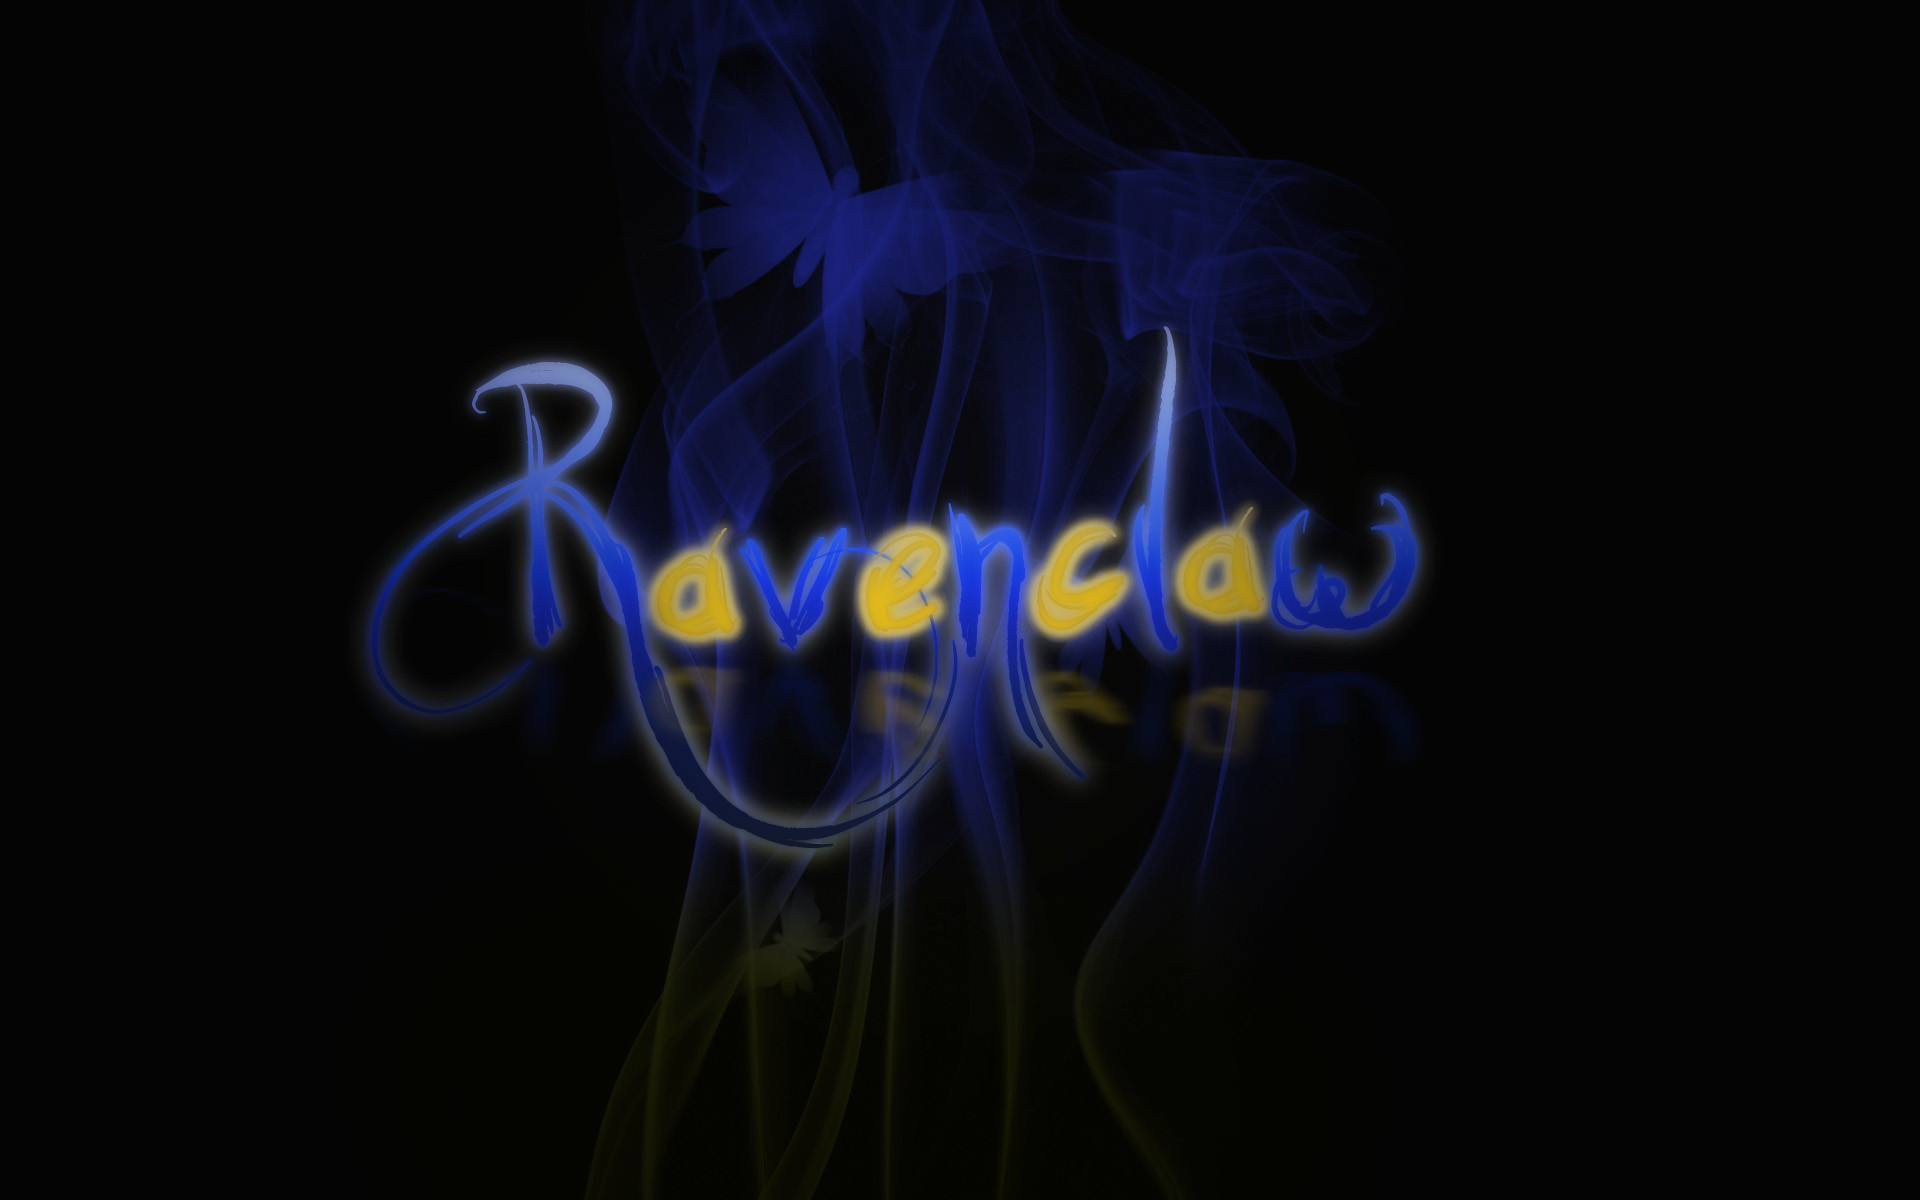 1920x1200 Harry Potter Iphone Wallpaper Ravenclaw Ravenclaw wallpaper by HTML .